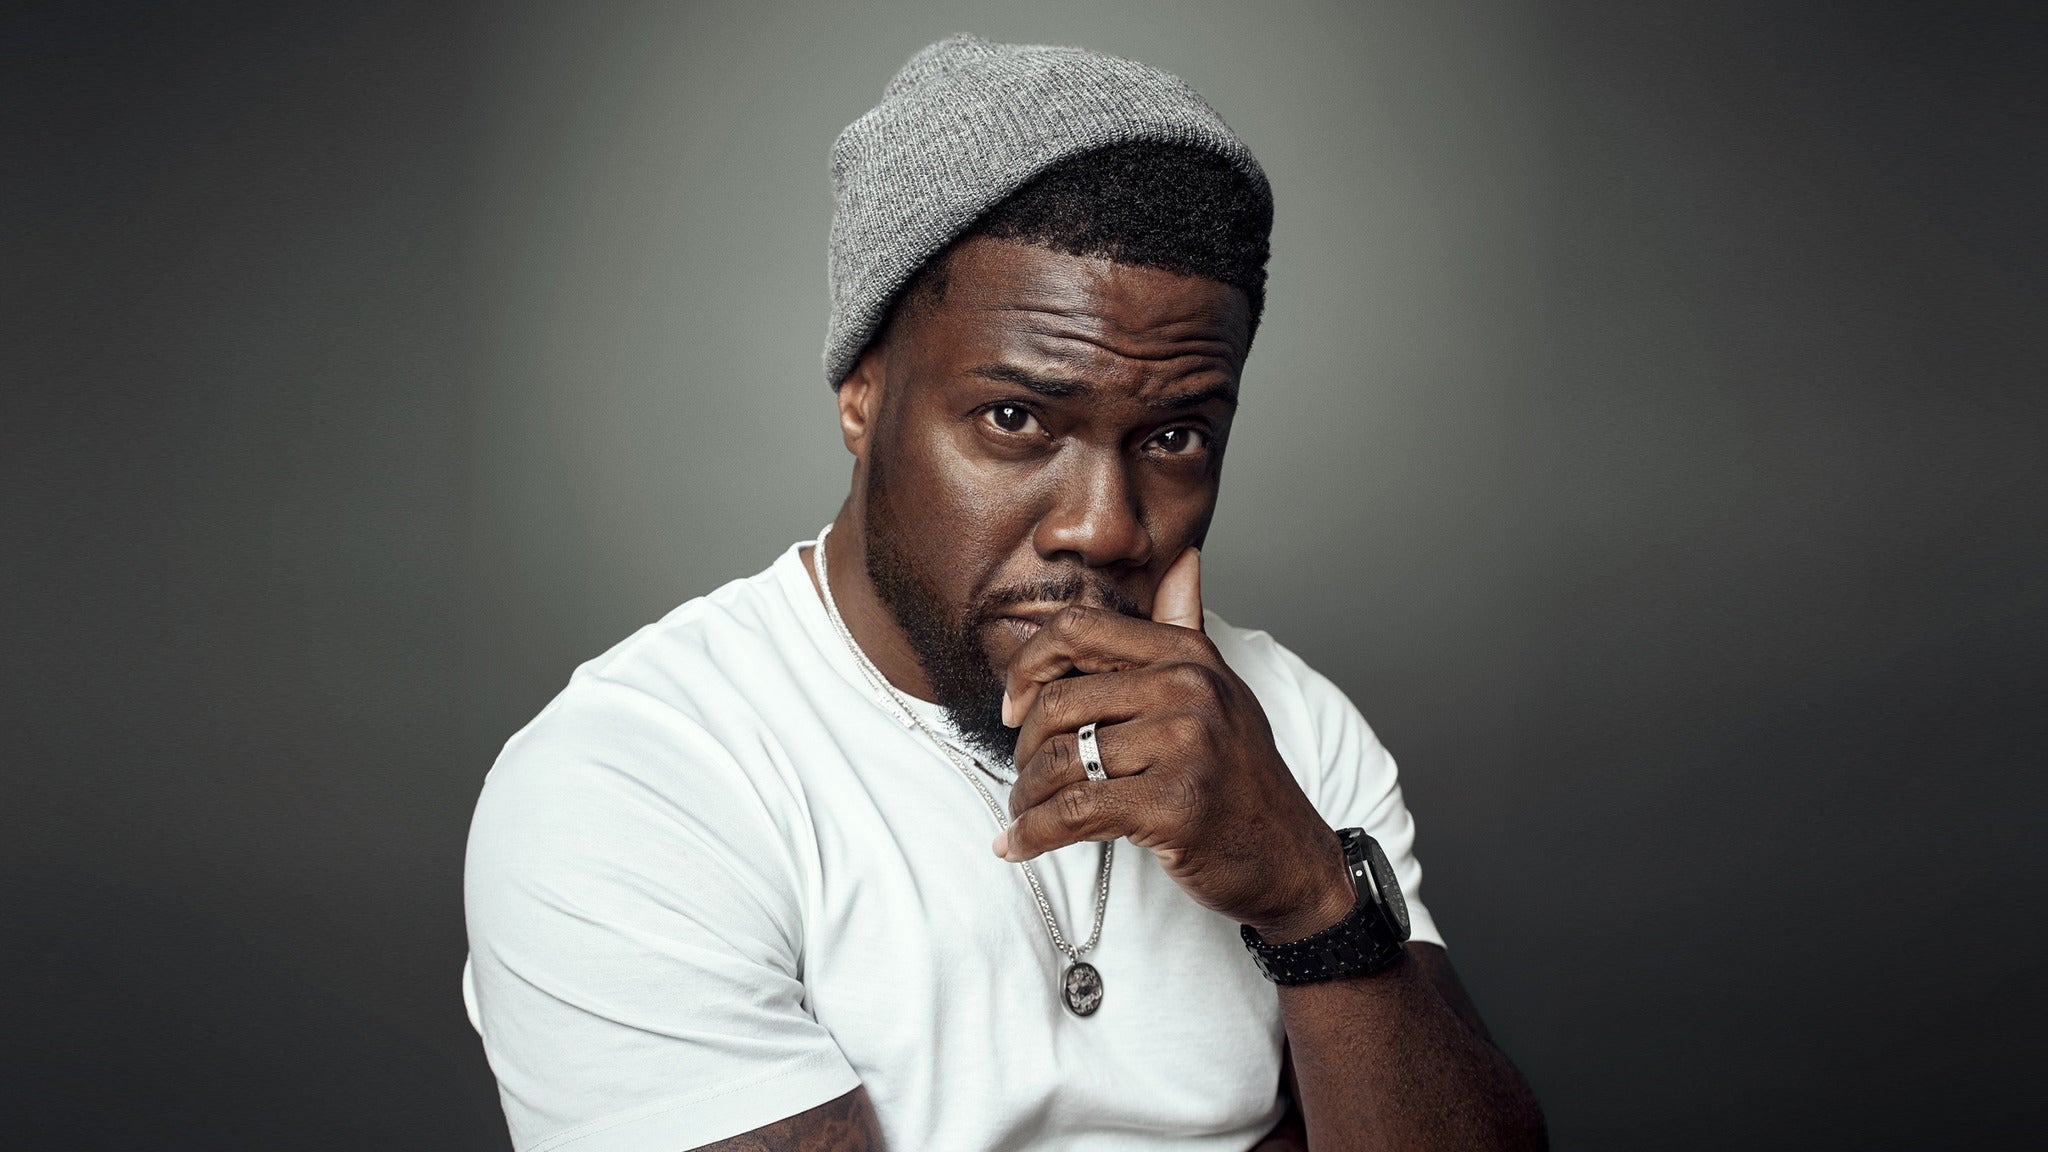 Kevin Hart: Reality Check at Climate Pledge Arena - Seattle, WA 98109